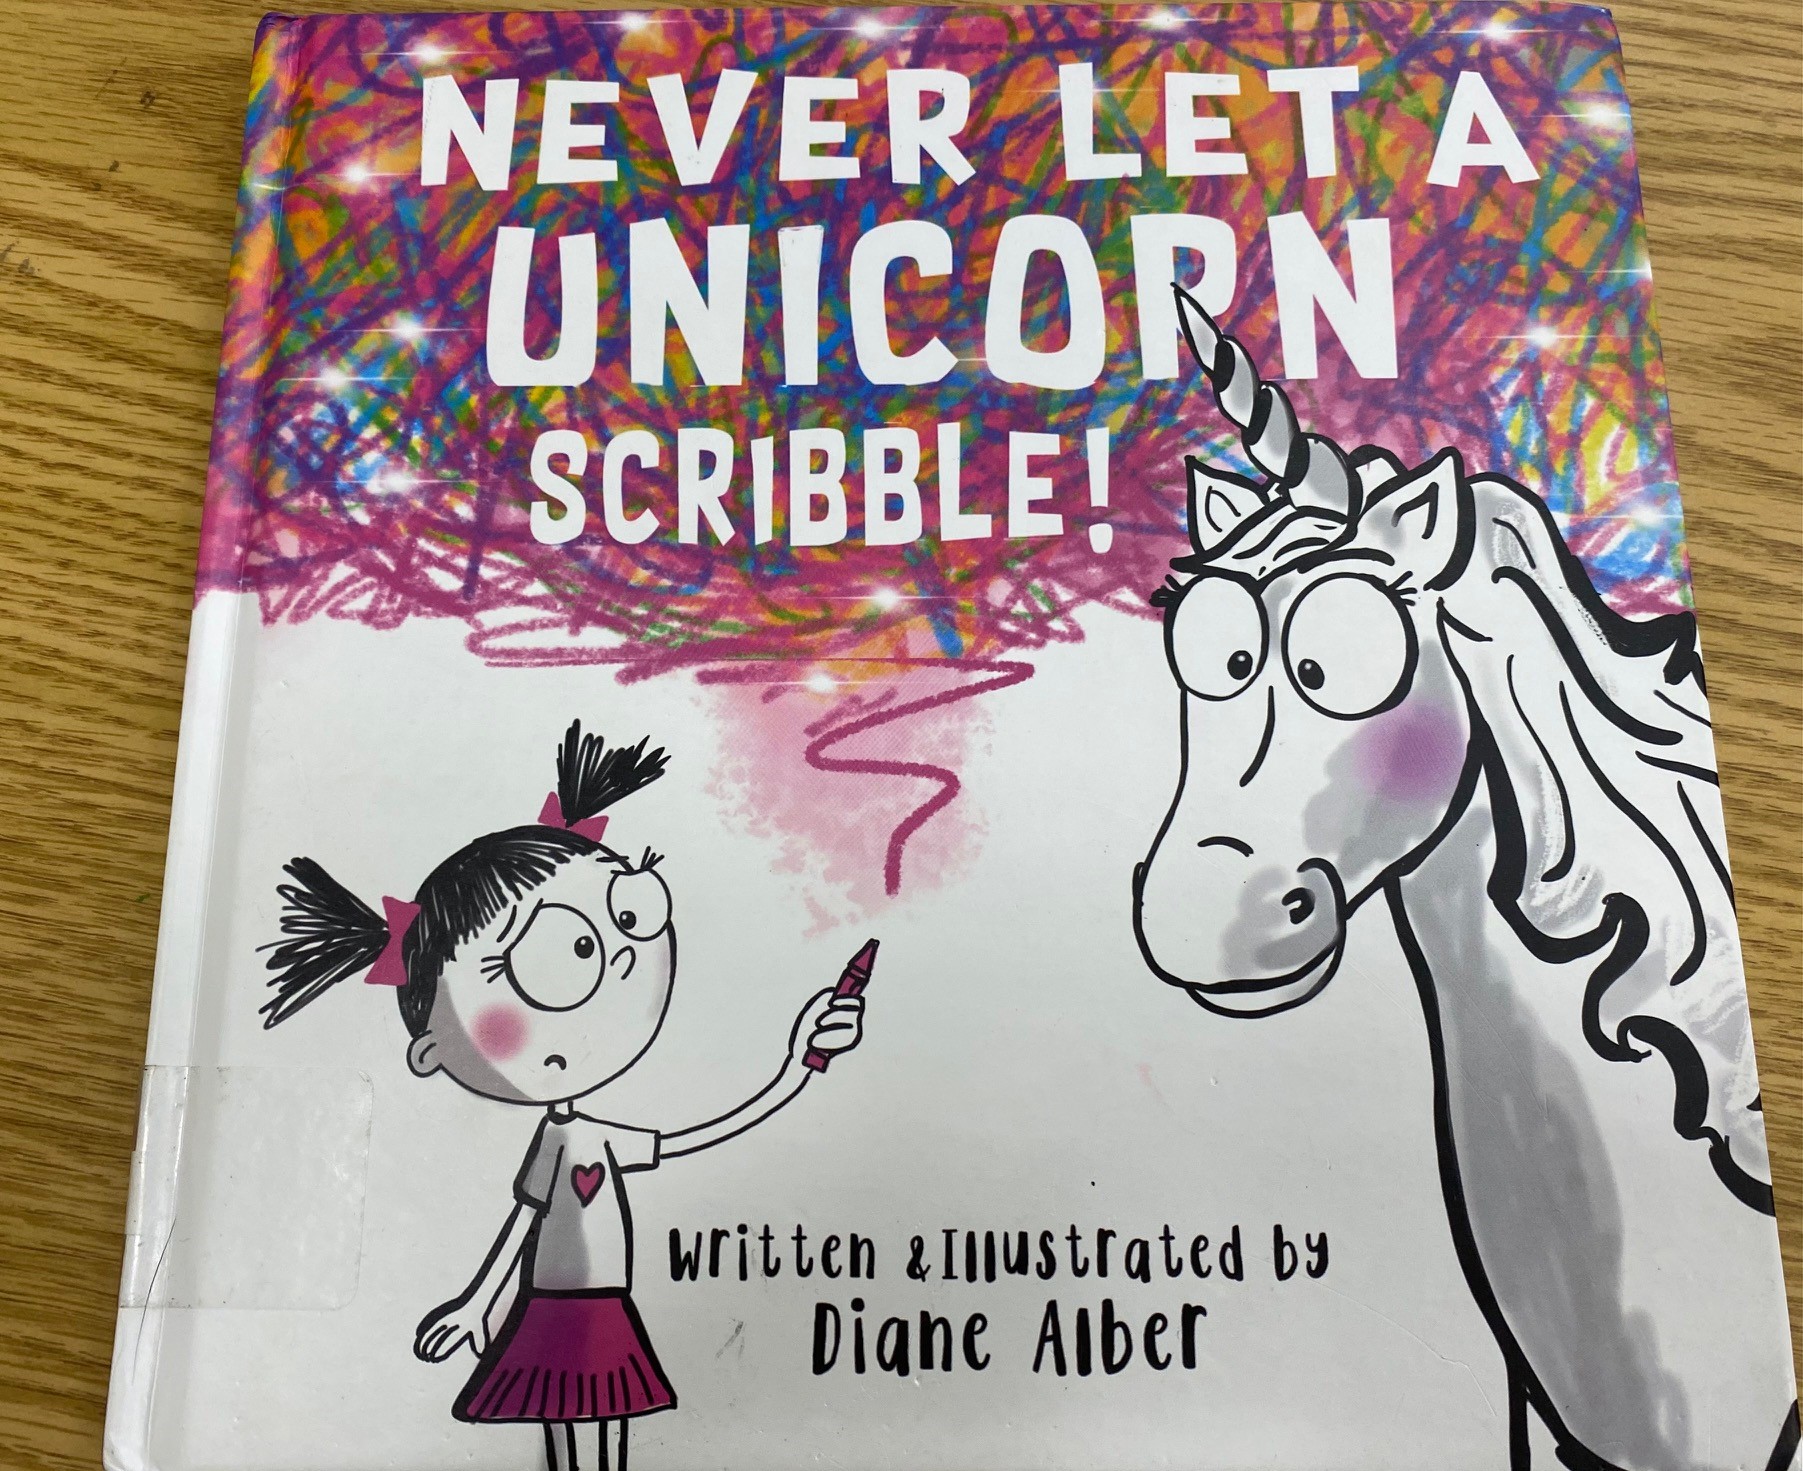 Never Let A Unicorn Scribble by Diane Alber